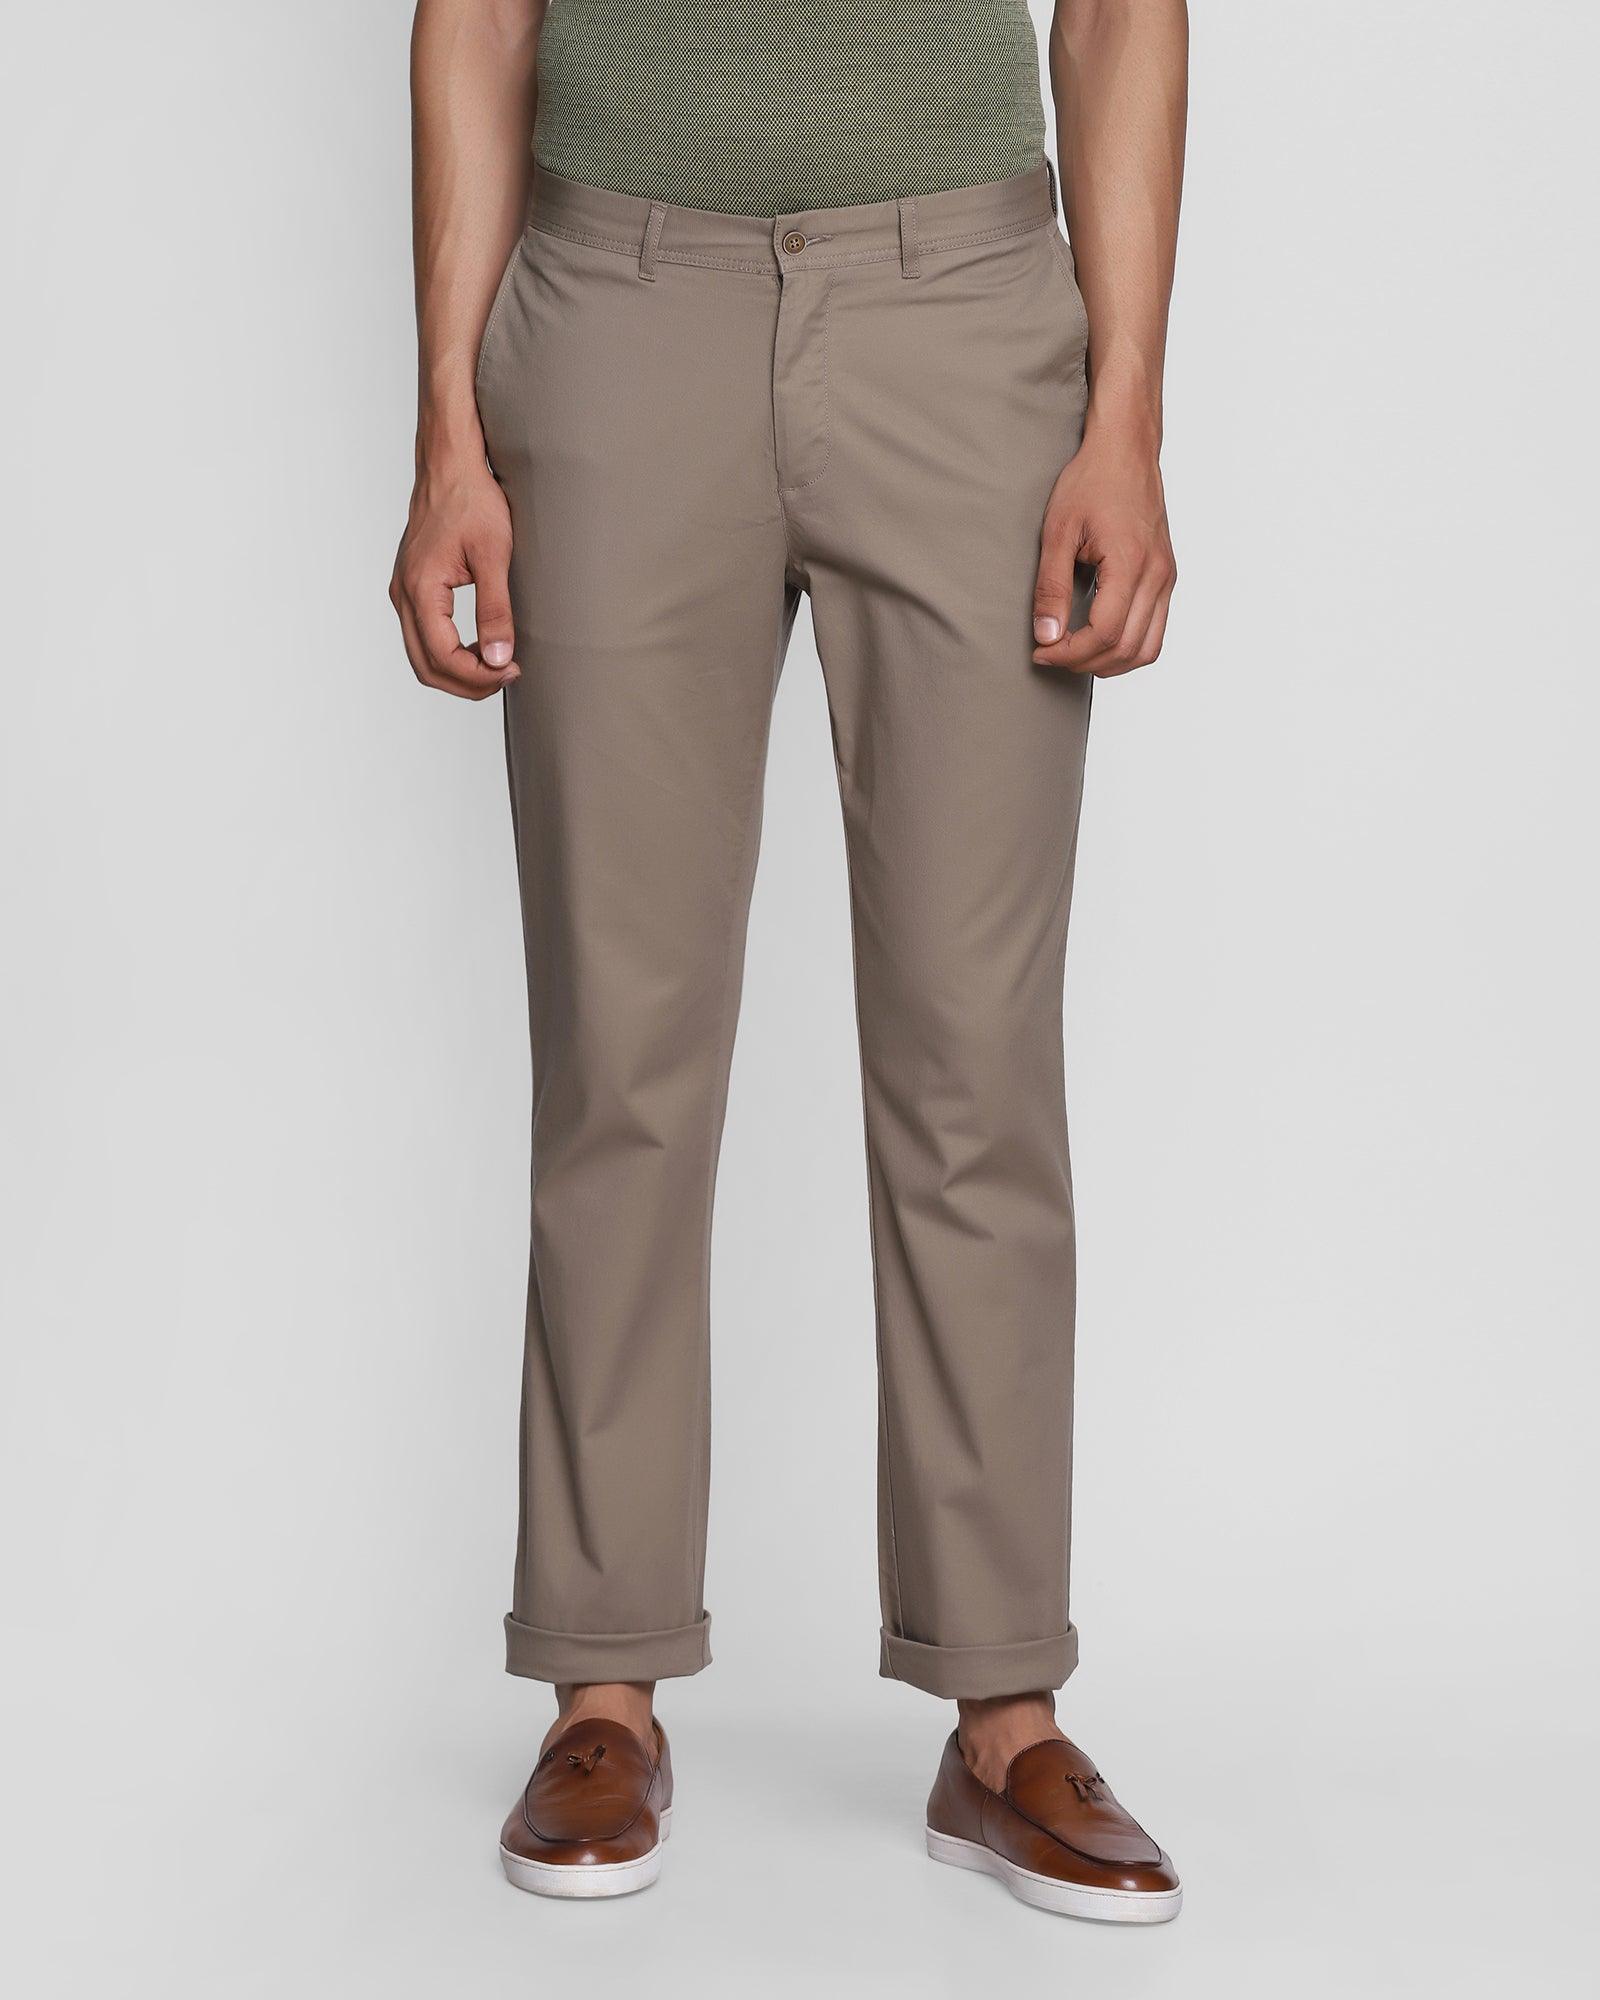 Straight B-90 Casual Mouse Textured Khakis - Altis